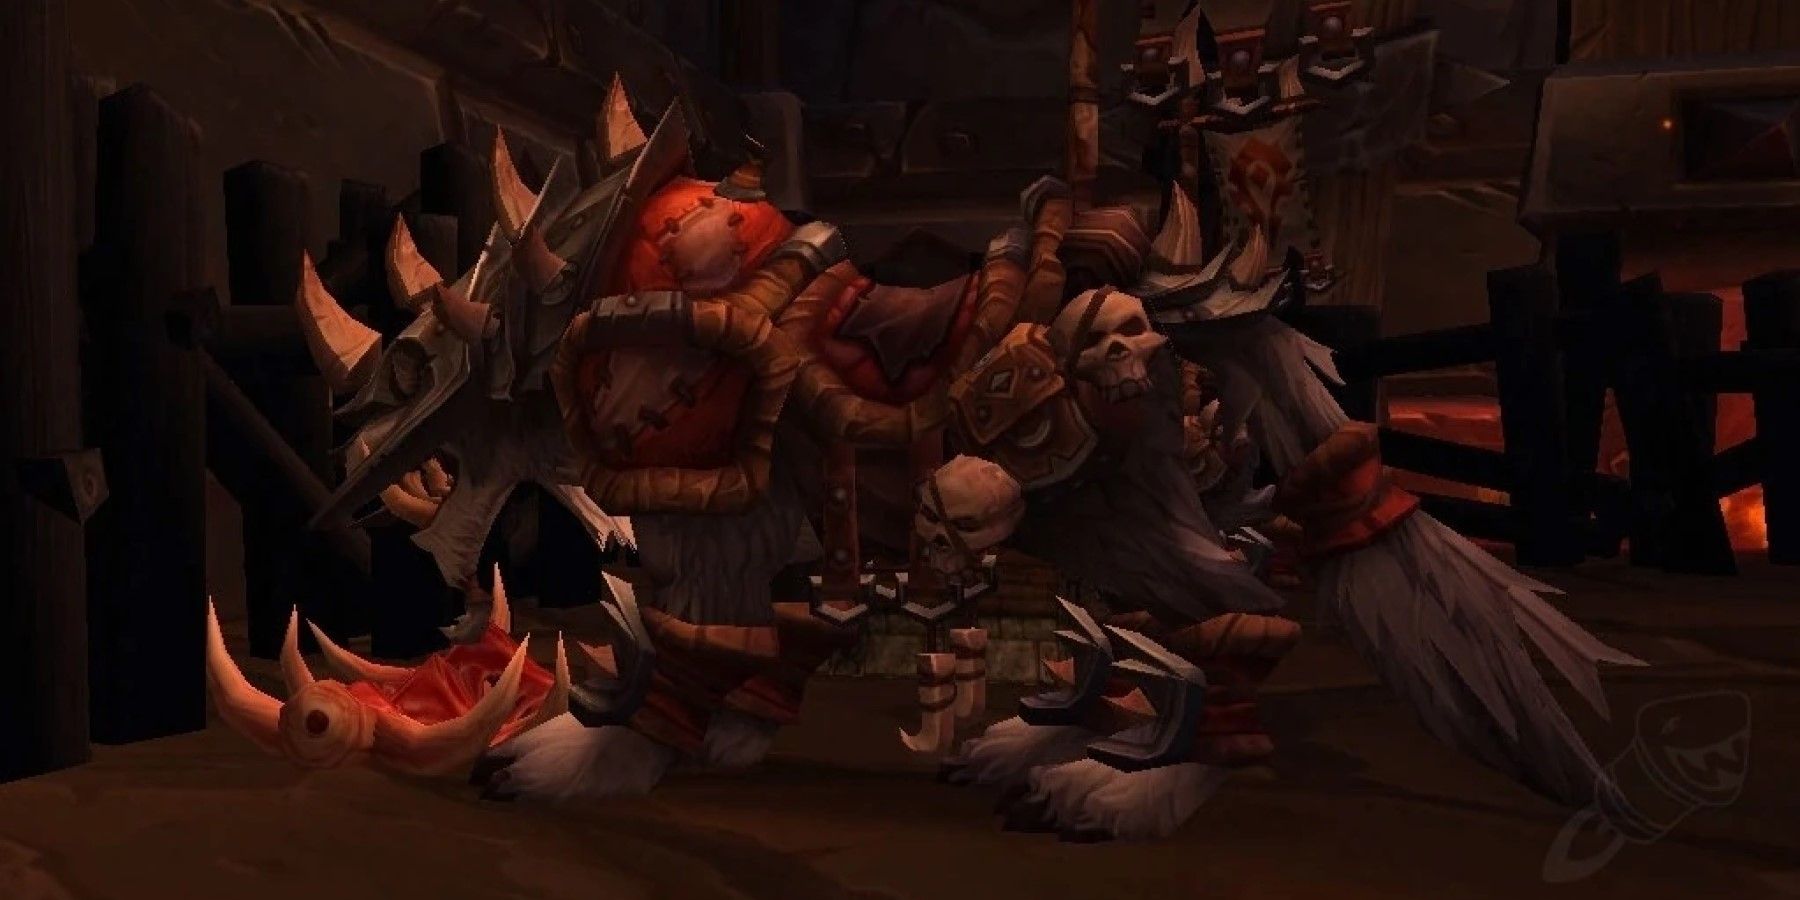 Korkron Warwolf mounts around the bend from the Mists of Pandaria